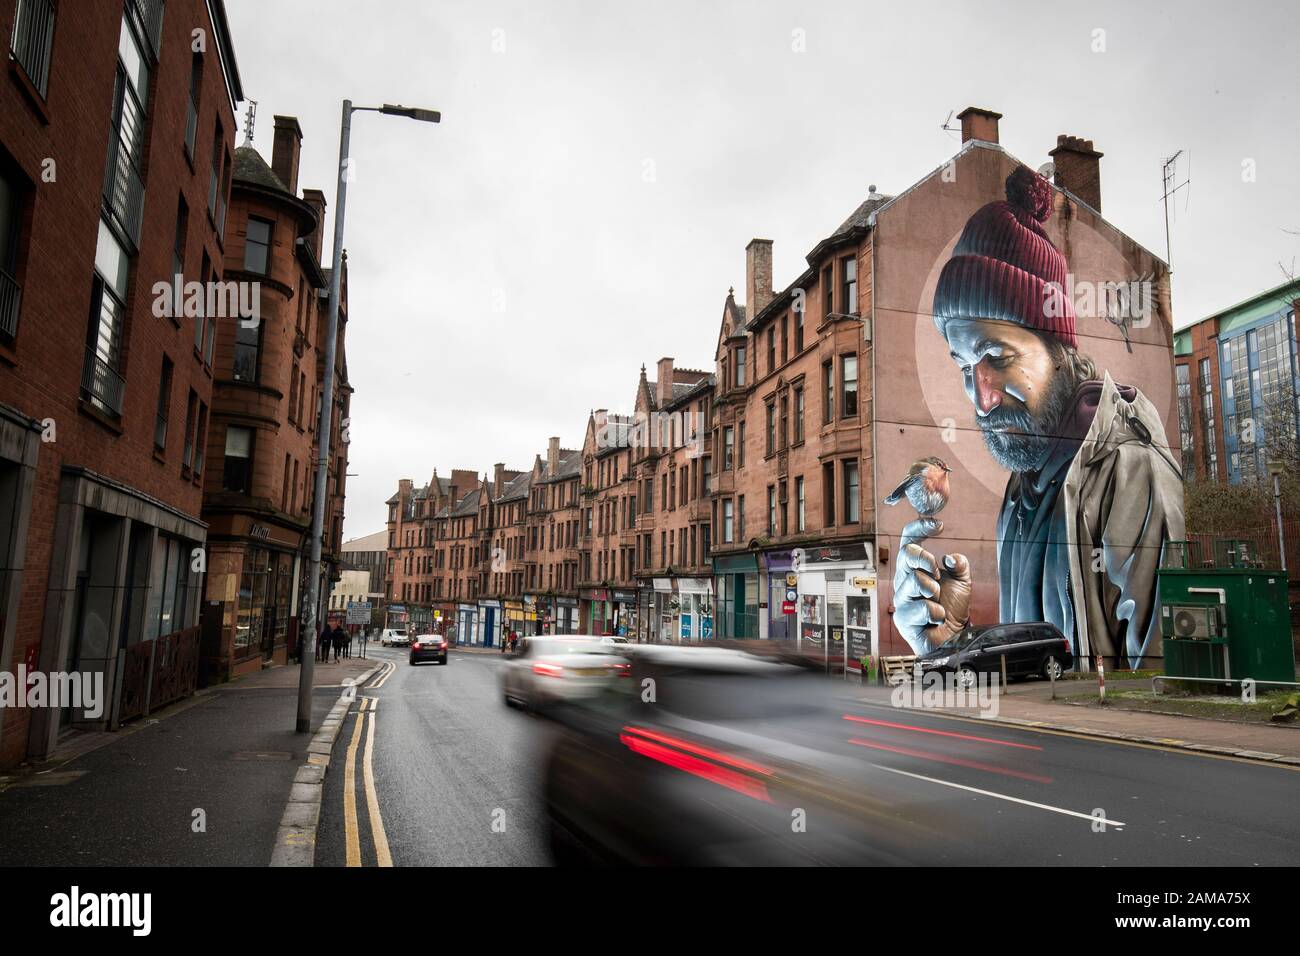 One of Glasgow's best-known murals, by street artist Smug, depicts a modern-day St Mungo which references the story of the Bird That Never Flew. January 13 is the feast day of St Mungo who is the patron saint and founder of the City of Glasgow. Stock Photo